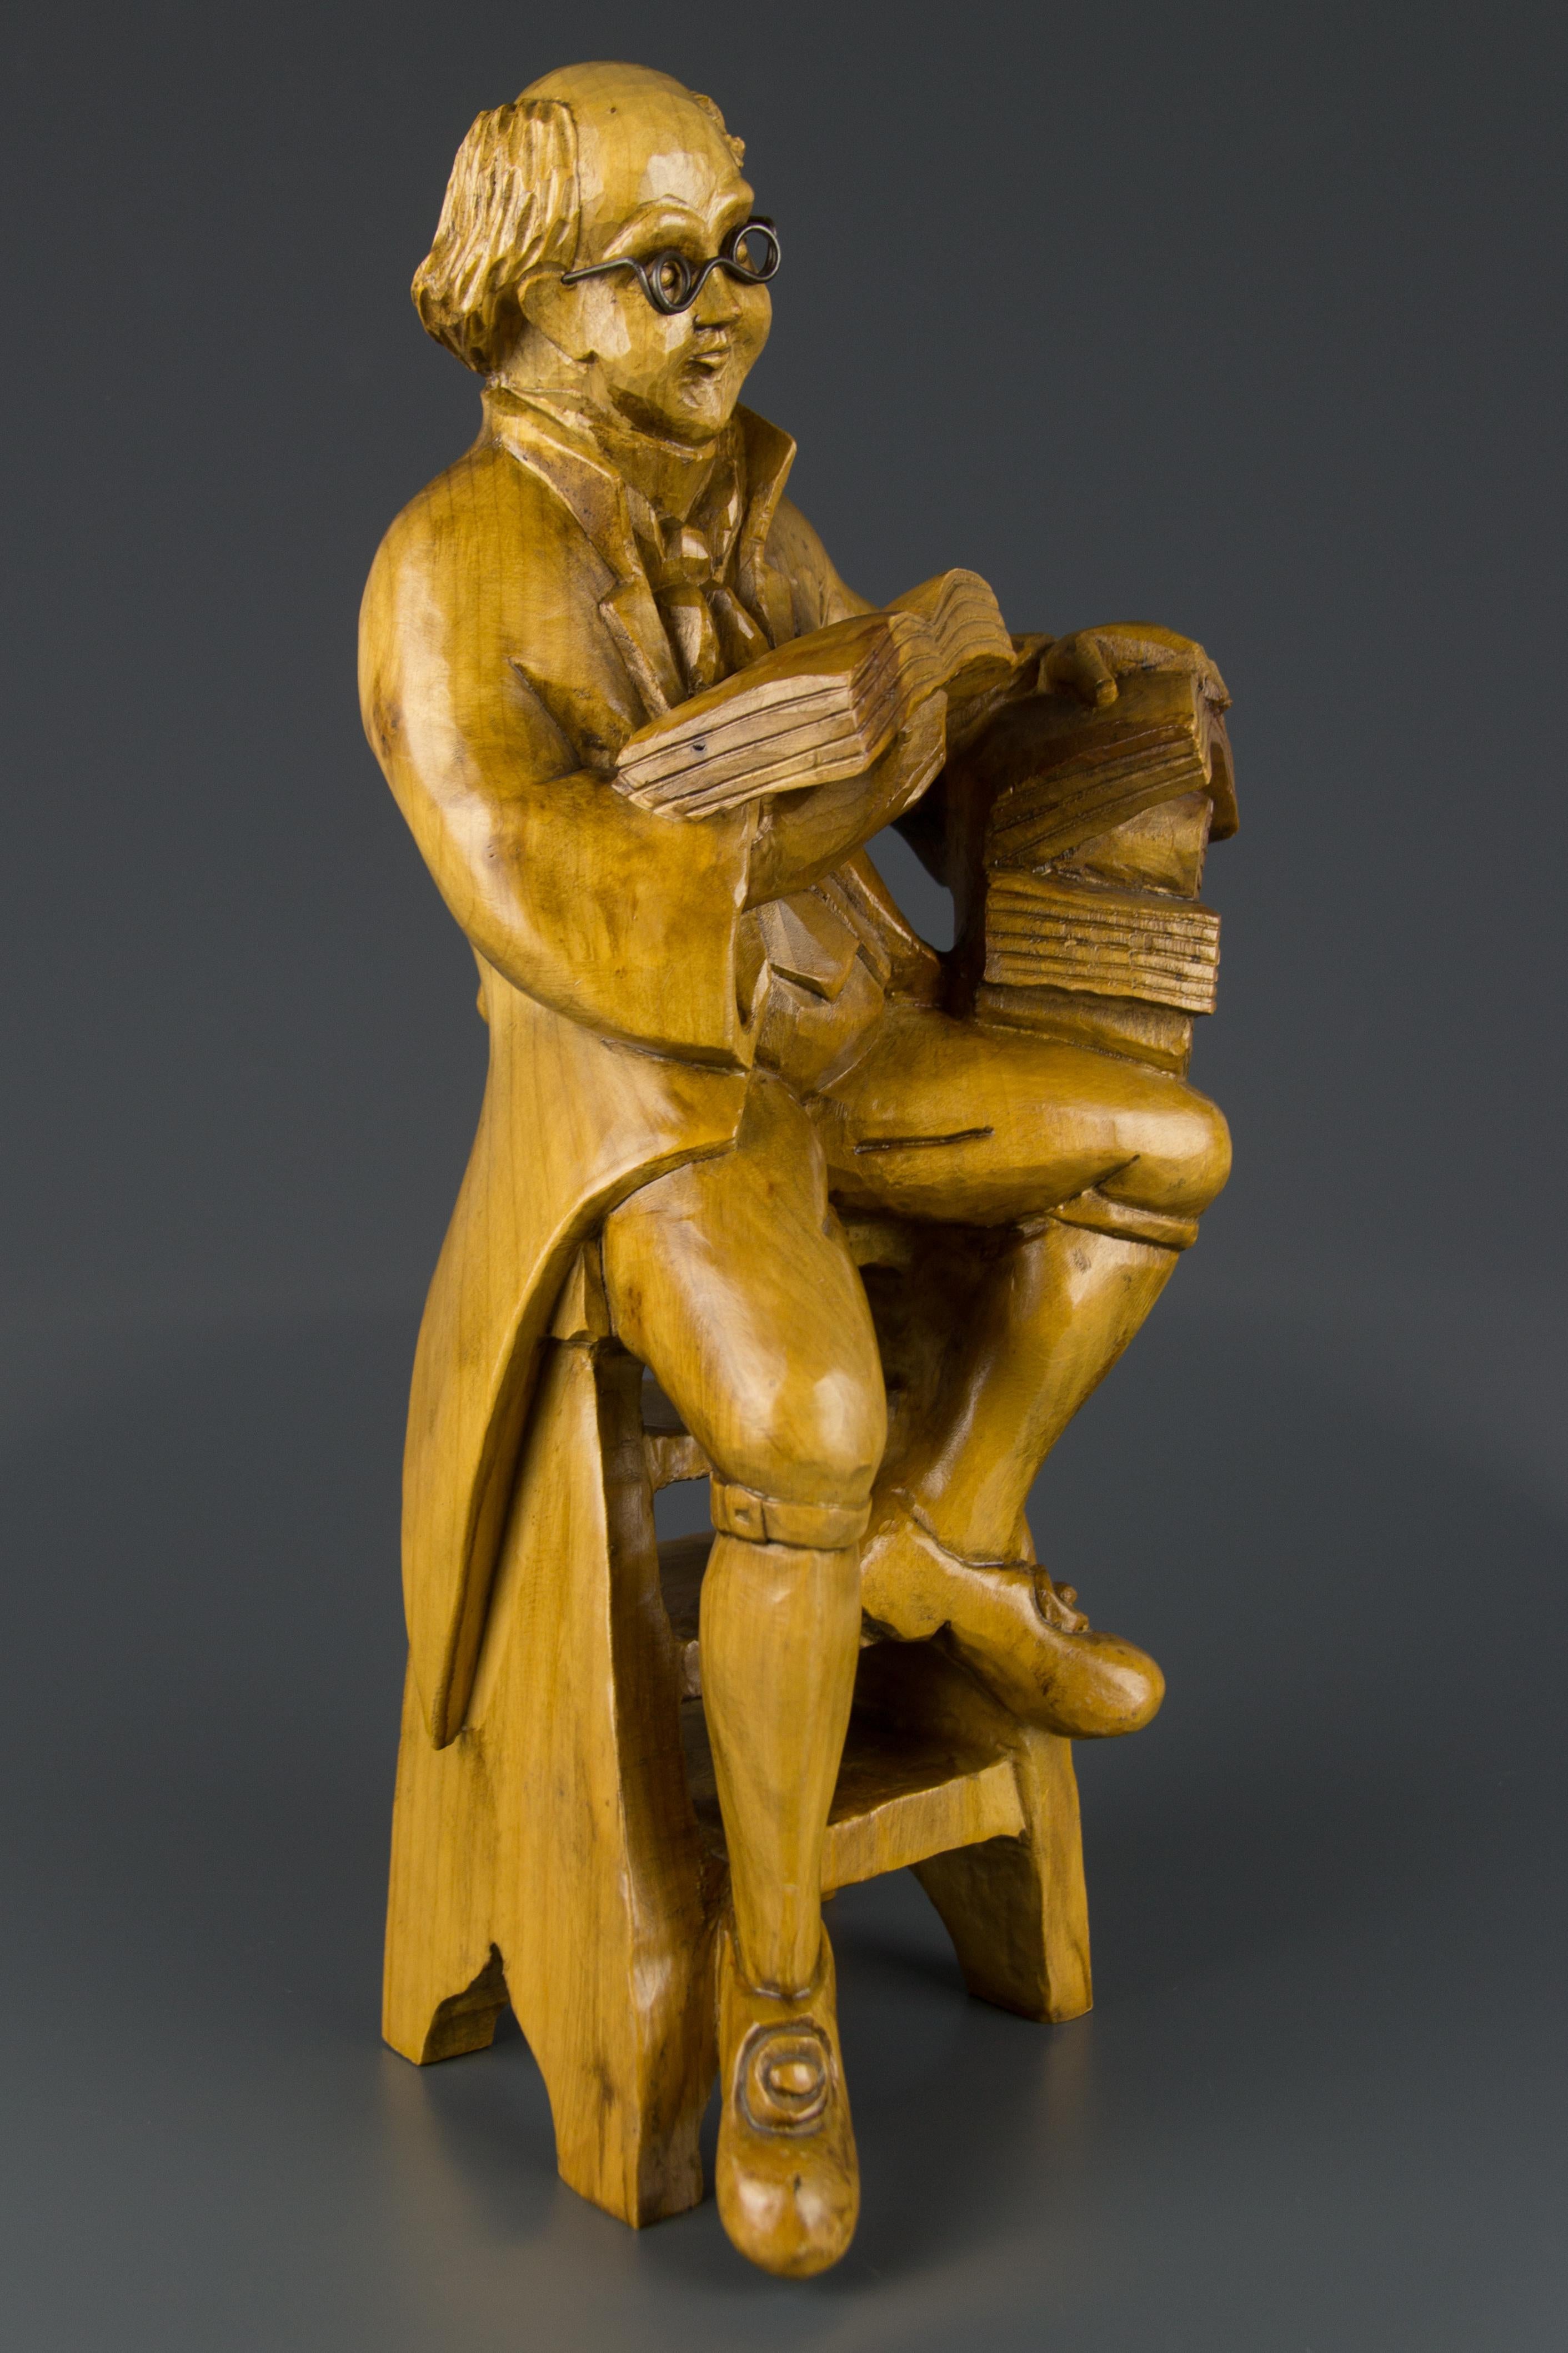 A masterfully carved wooden sculpture of a professor with books sitting on a chair. Beautifully made in details, this adorable sculpture will decorate any room - office, library, living room.
Dimensions: Height 40.5 cm / 15.94 in, width 17 cm /